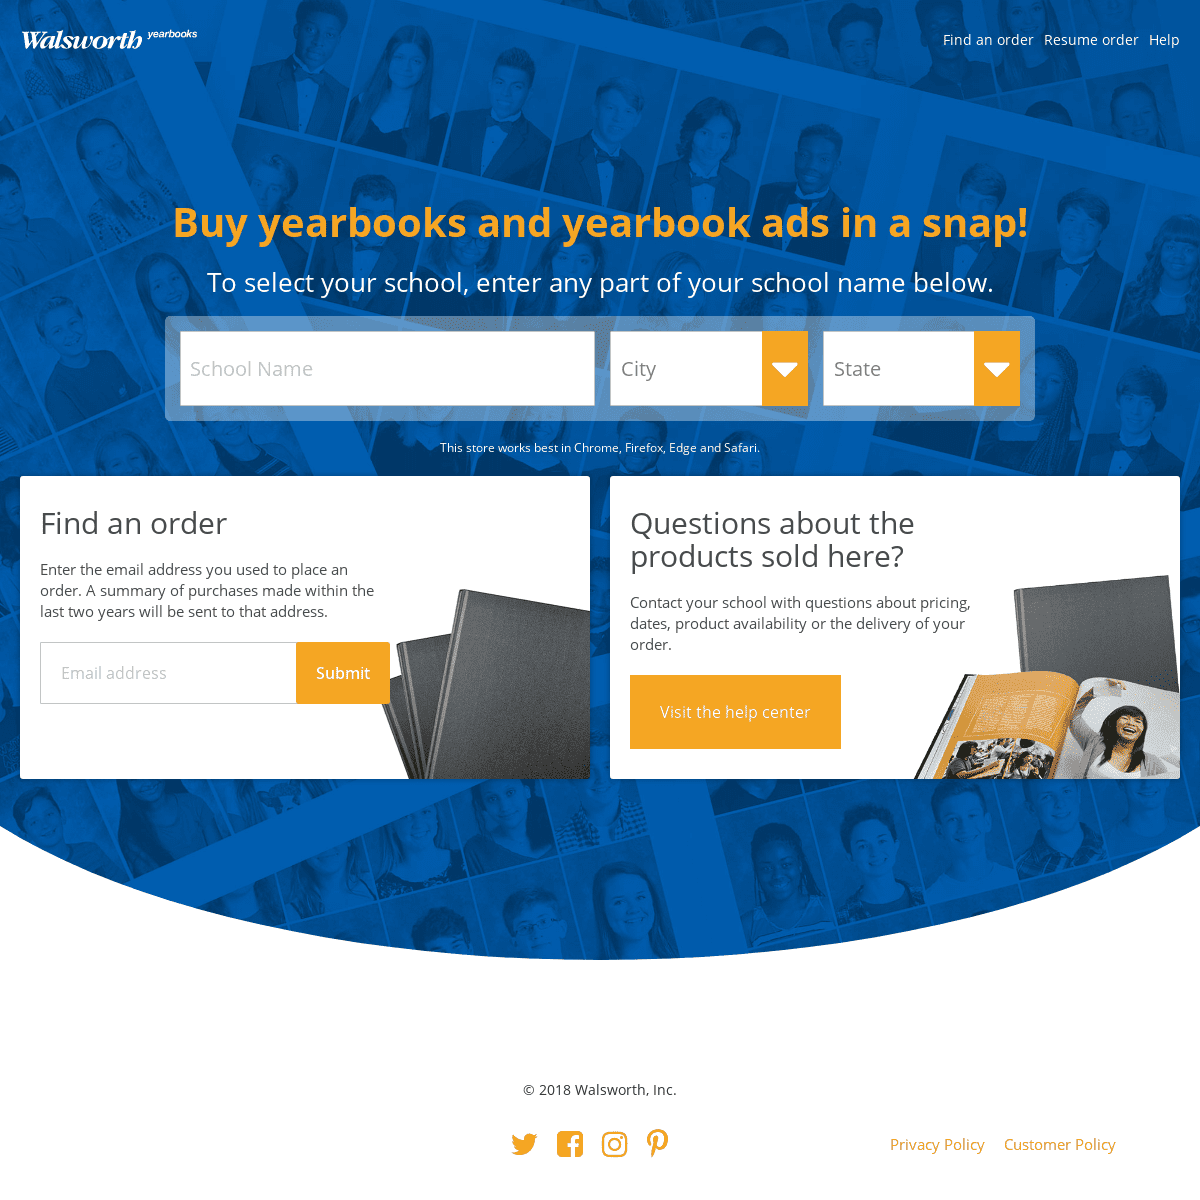 A complete backup of yearbookforever.com